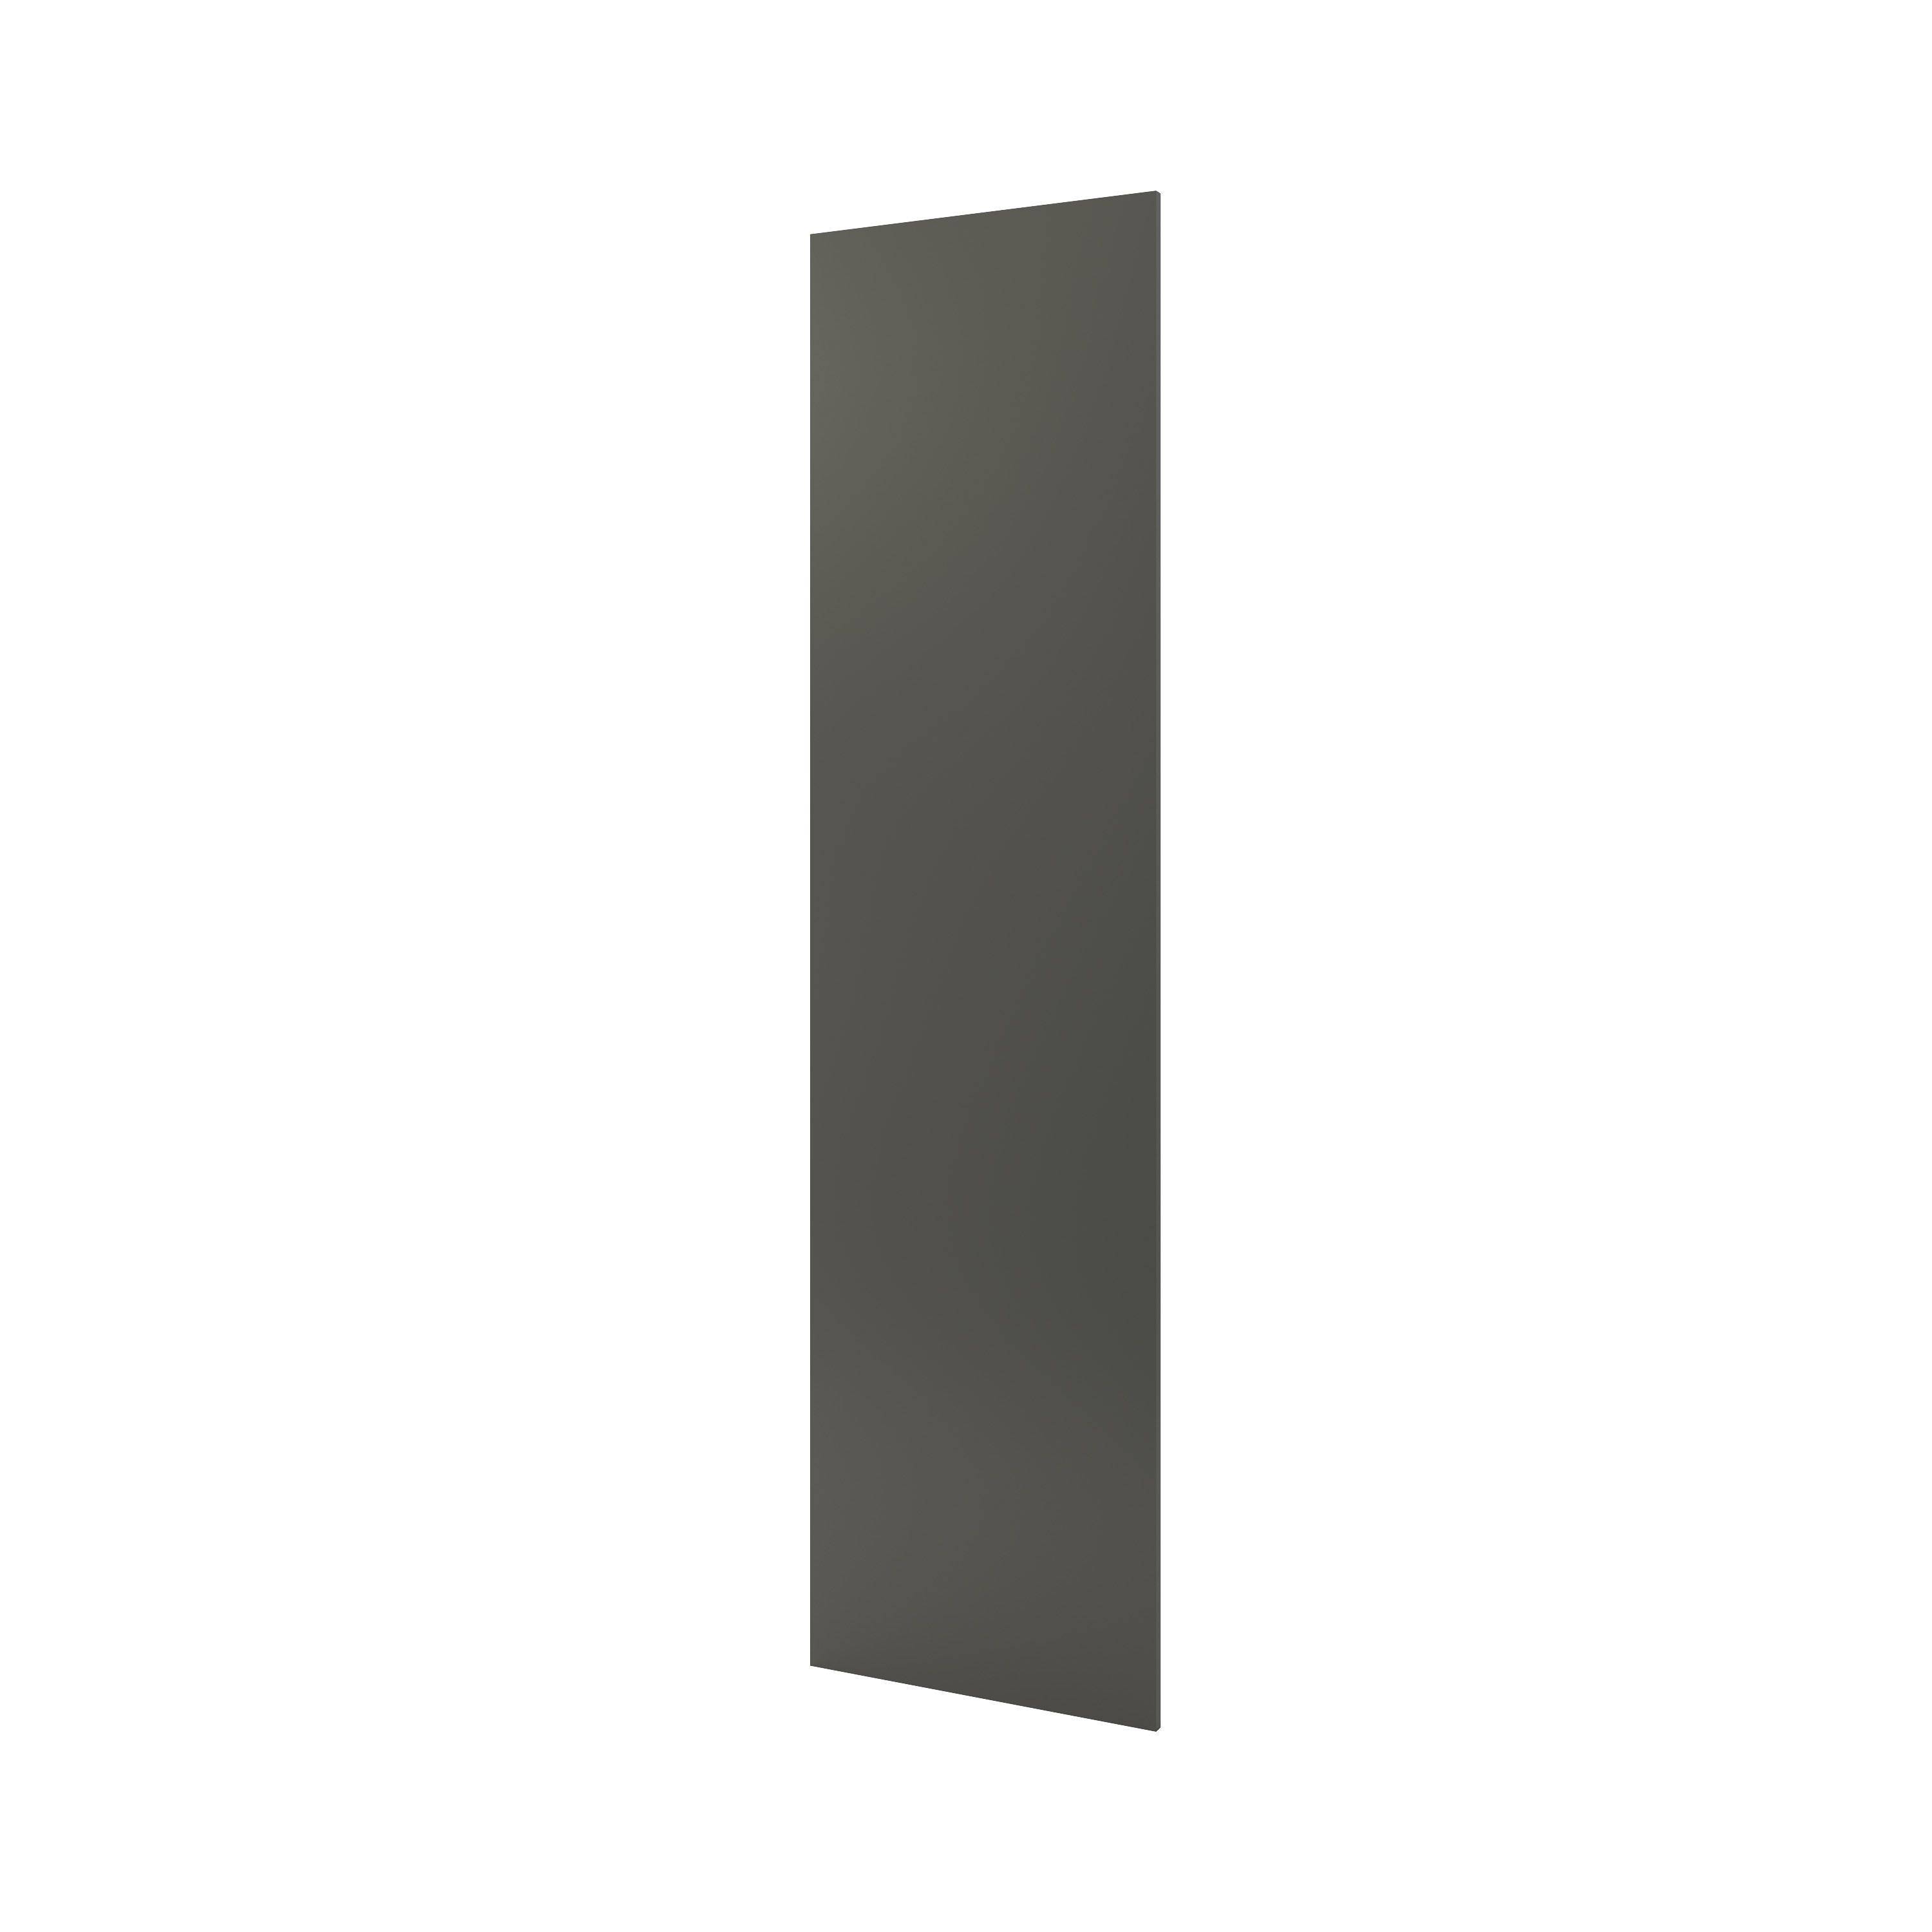 GoodHome Stevia & Garcinia Gloss anthracite slab Tall End panel (H)2190mm (W)570mm, Set